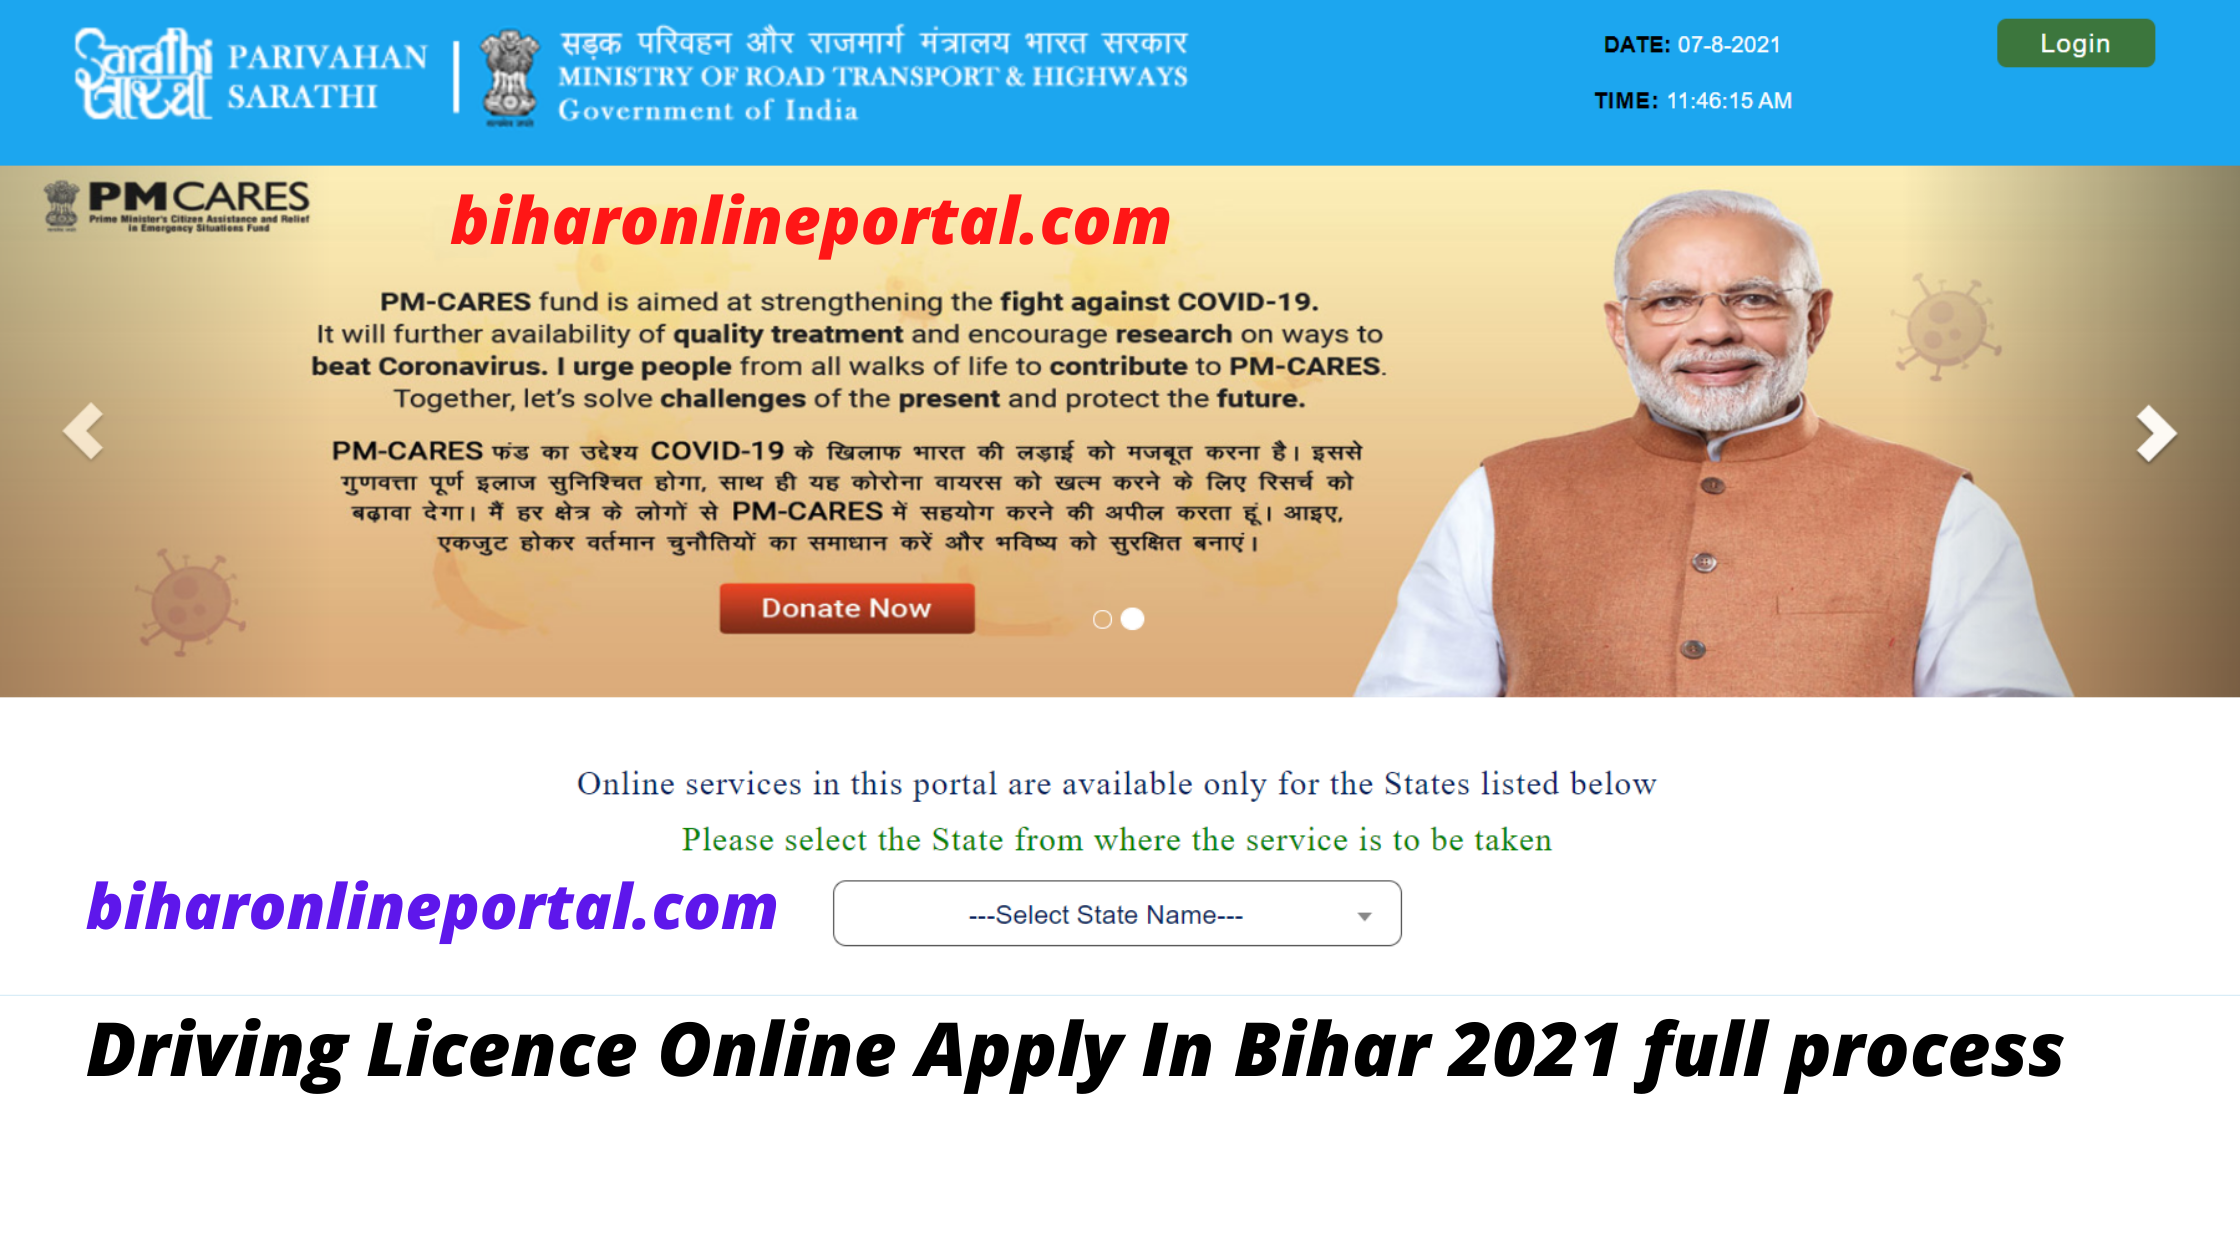 Driving Licence Online Apply In Bihar 2021 full process